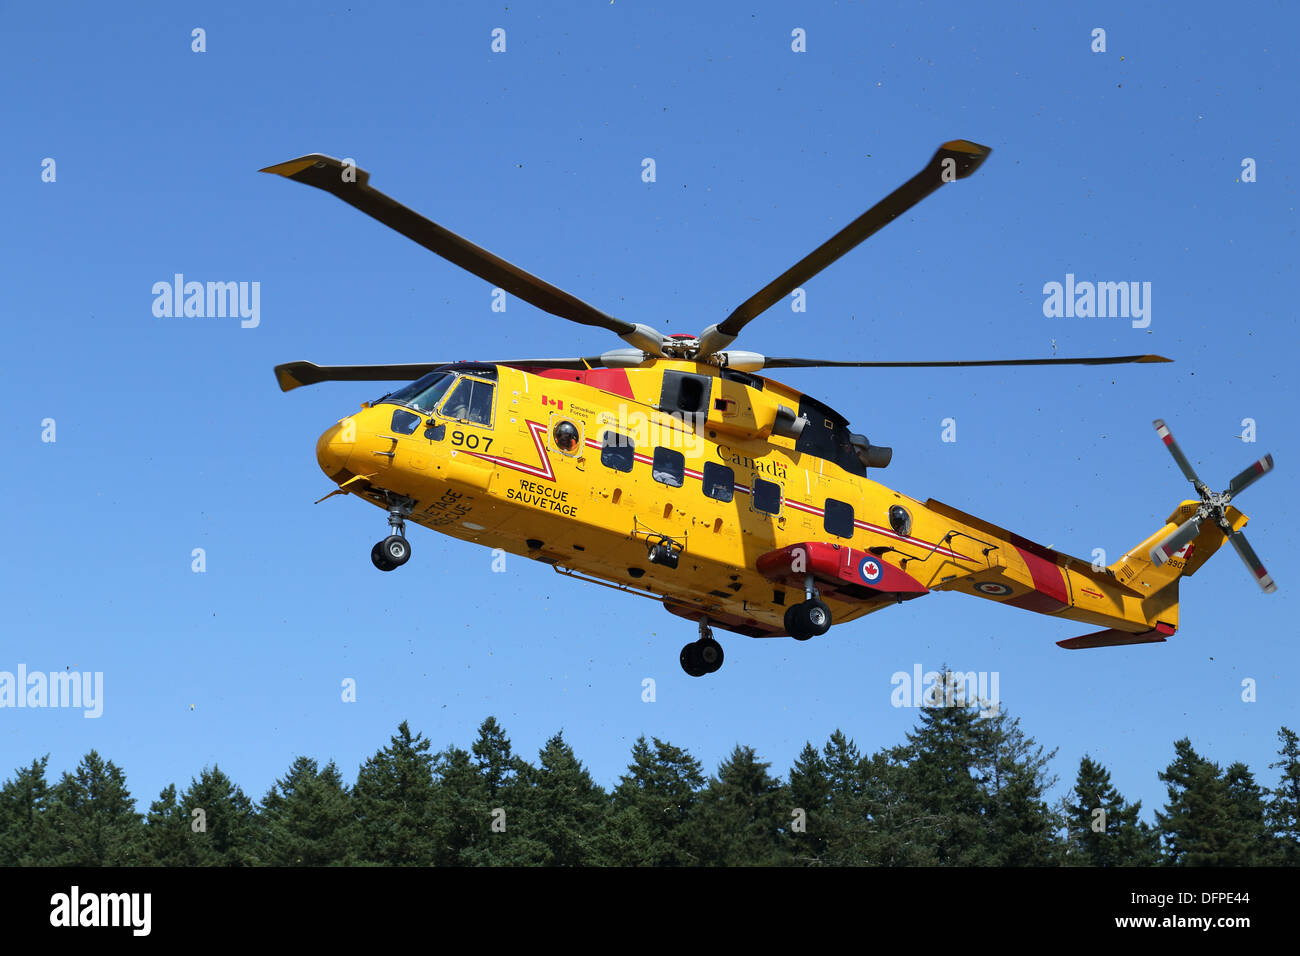 Canadian Forces  AgustaWestland CH-149 Cormorant Helicopter Descending Stock Photo